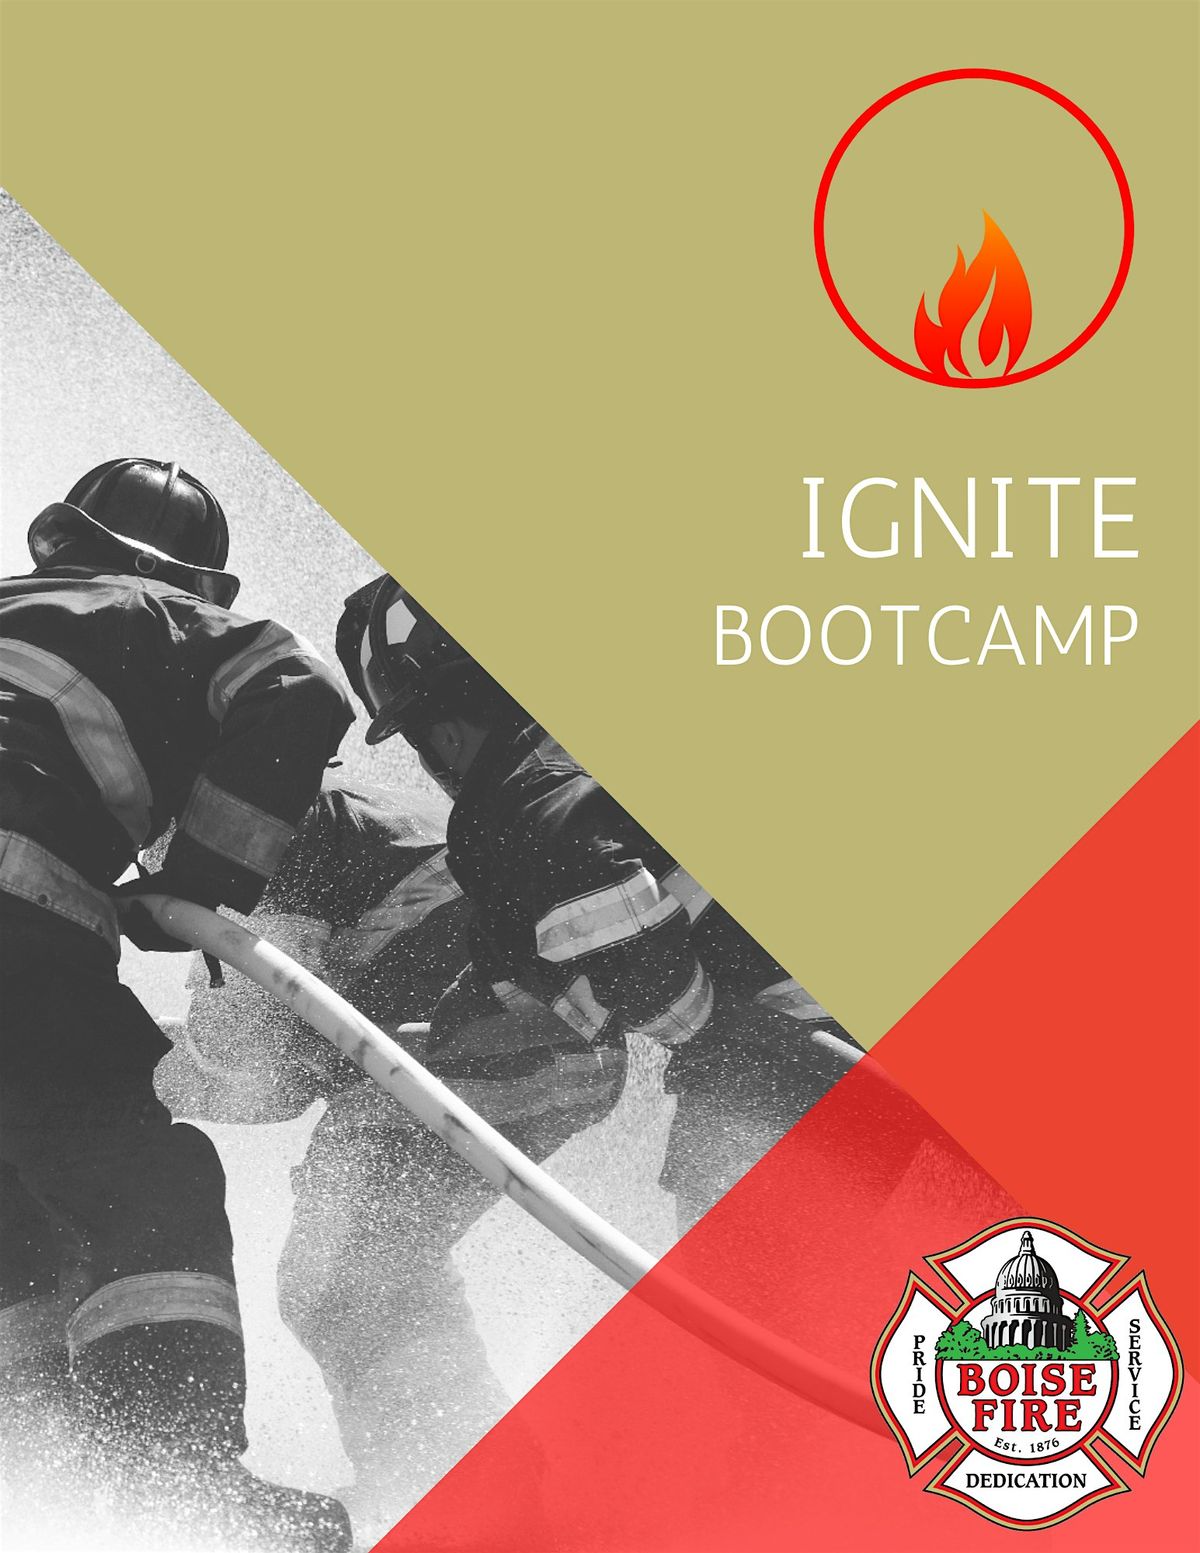 Ignite Bootcamp - Treasure Valley Young Men's Fire Experience (14-17)